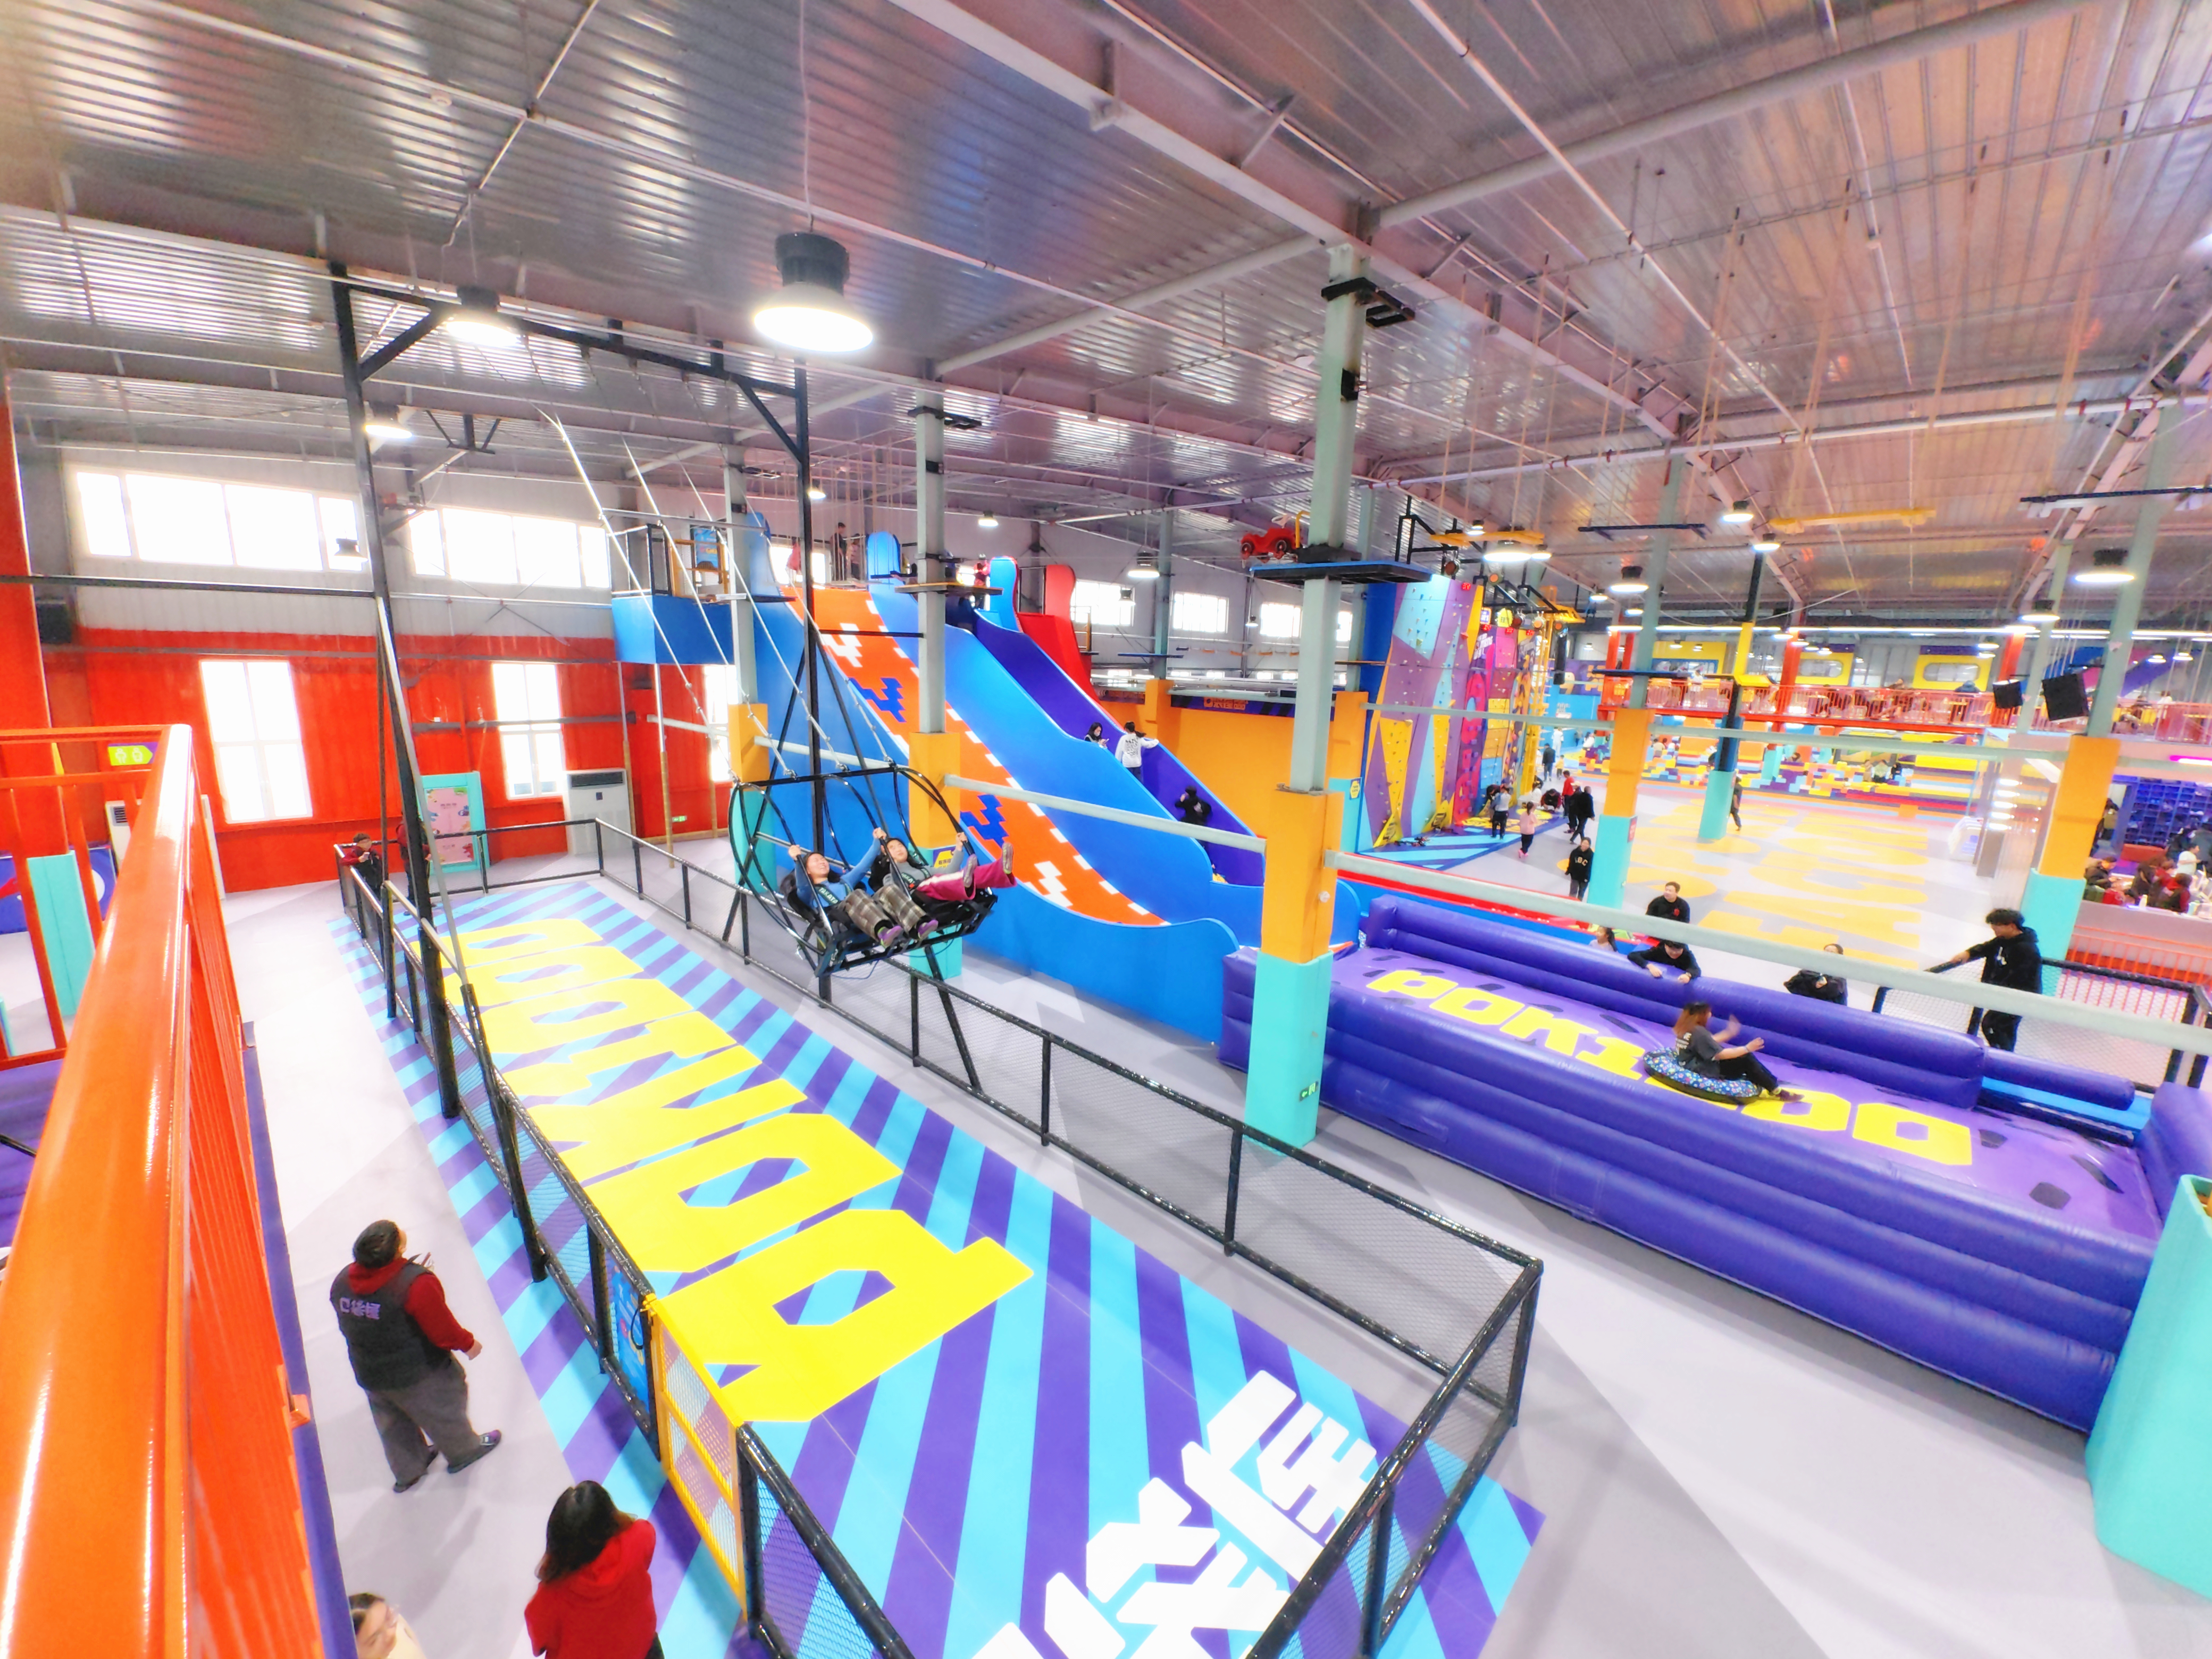 How to increase traffic to your indoor playground?